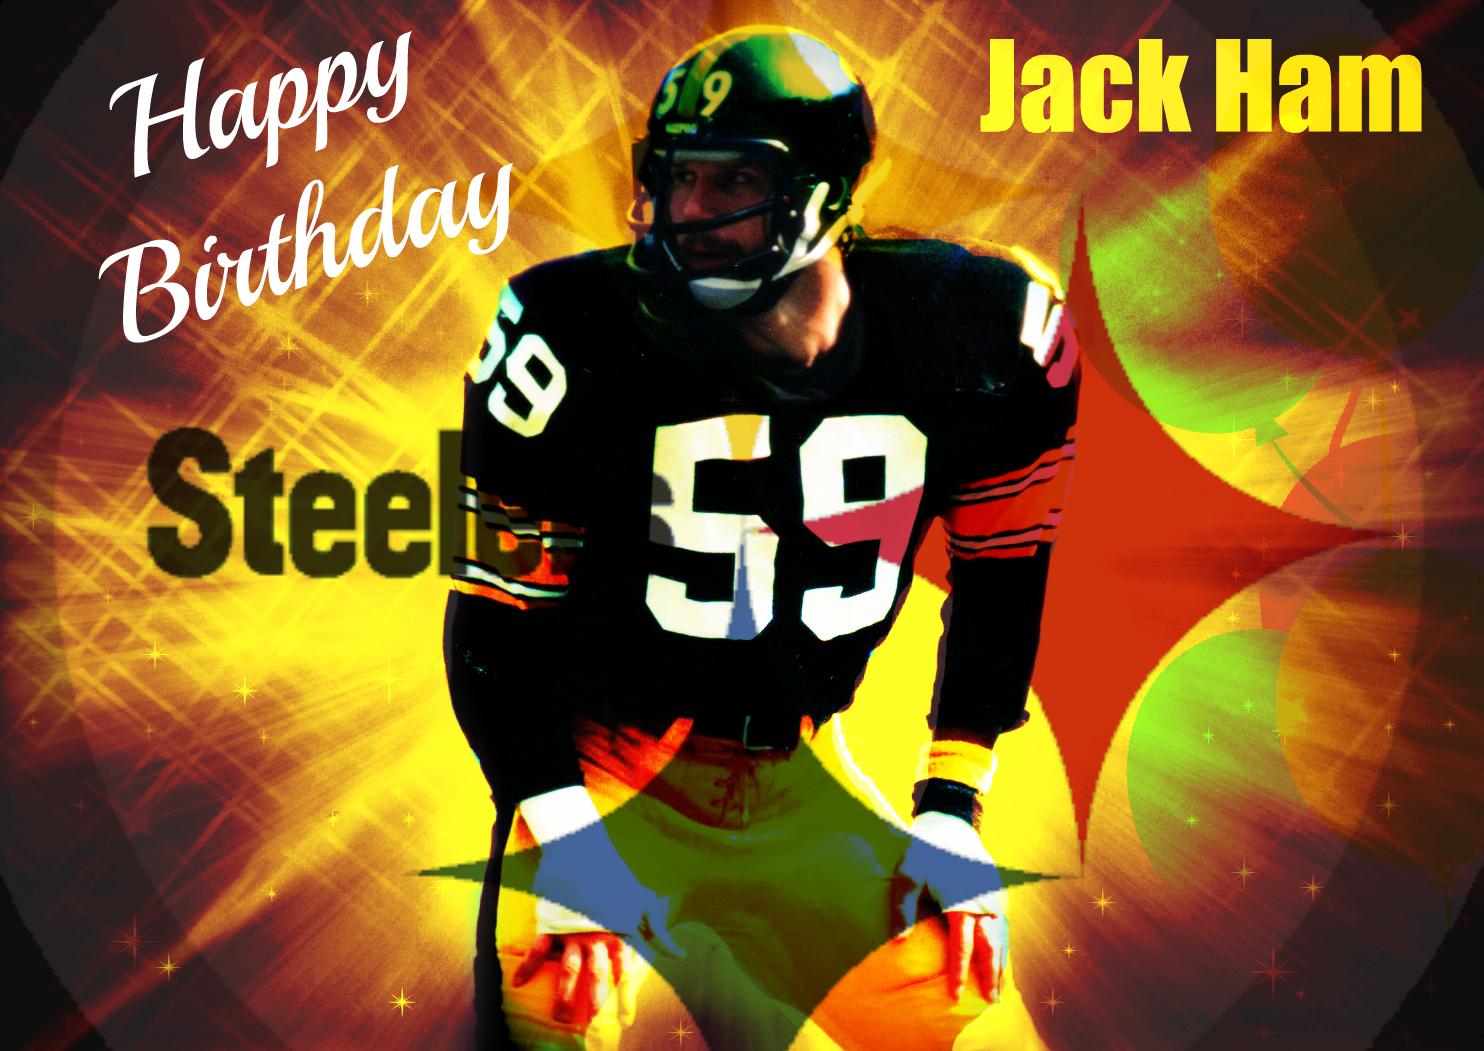 Wishing Jack Ham, the Greatest outside linebacker in the history of the NFL, a Very Happy 66th BDay! 